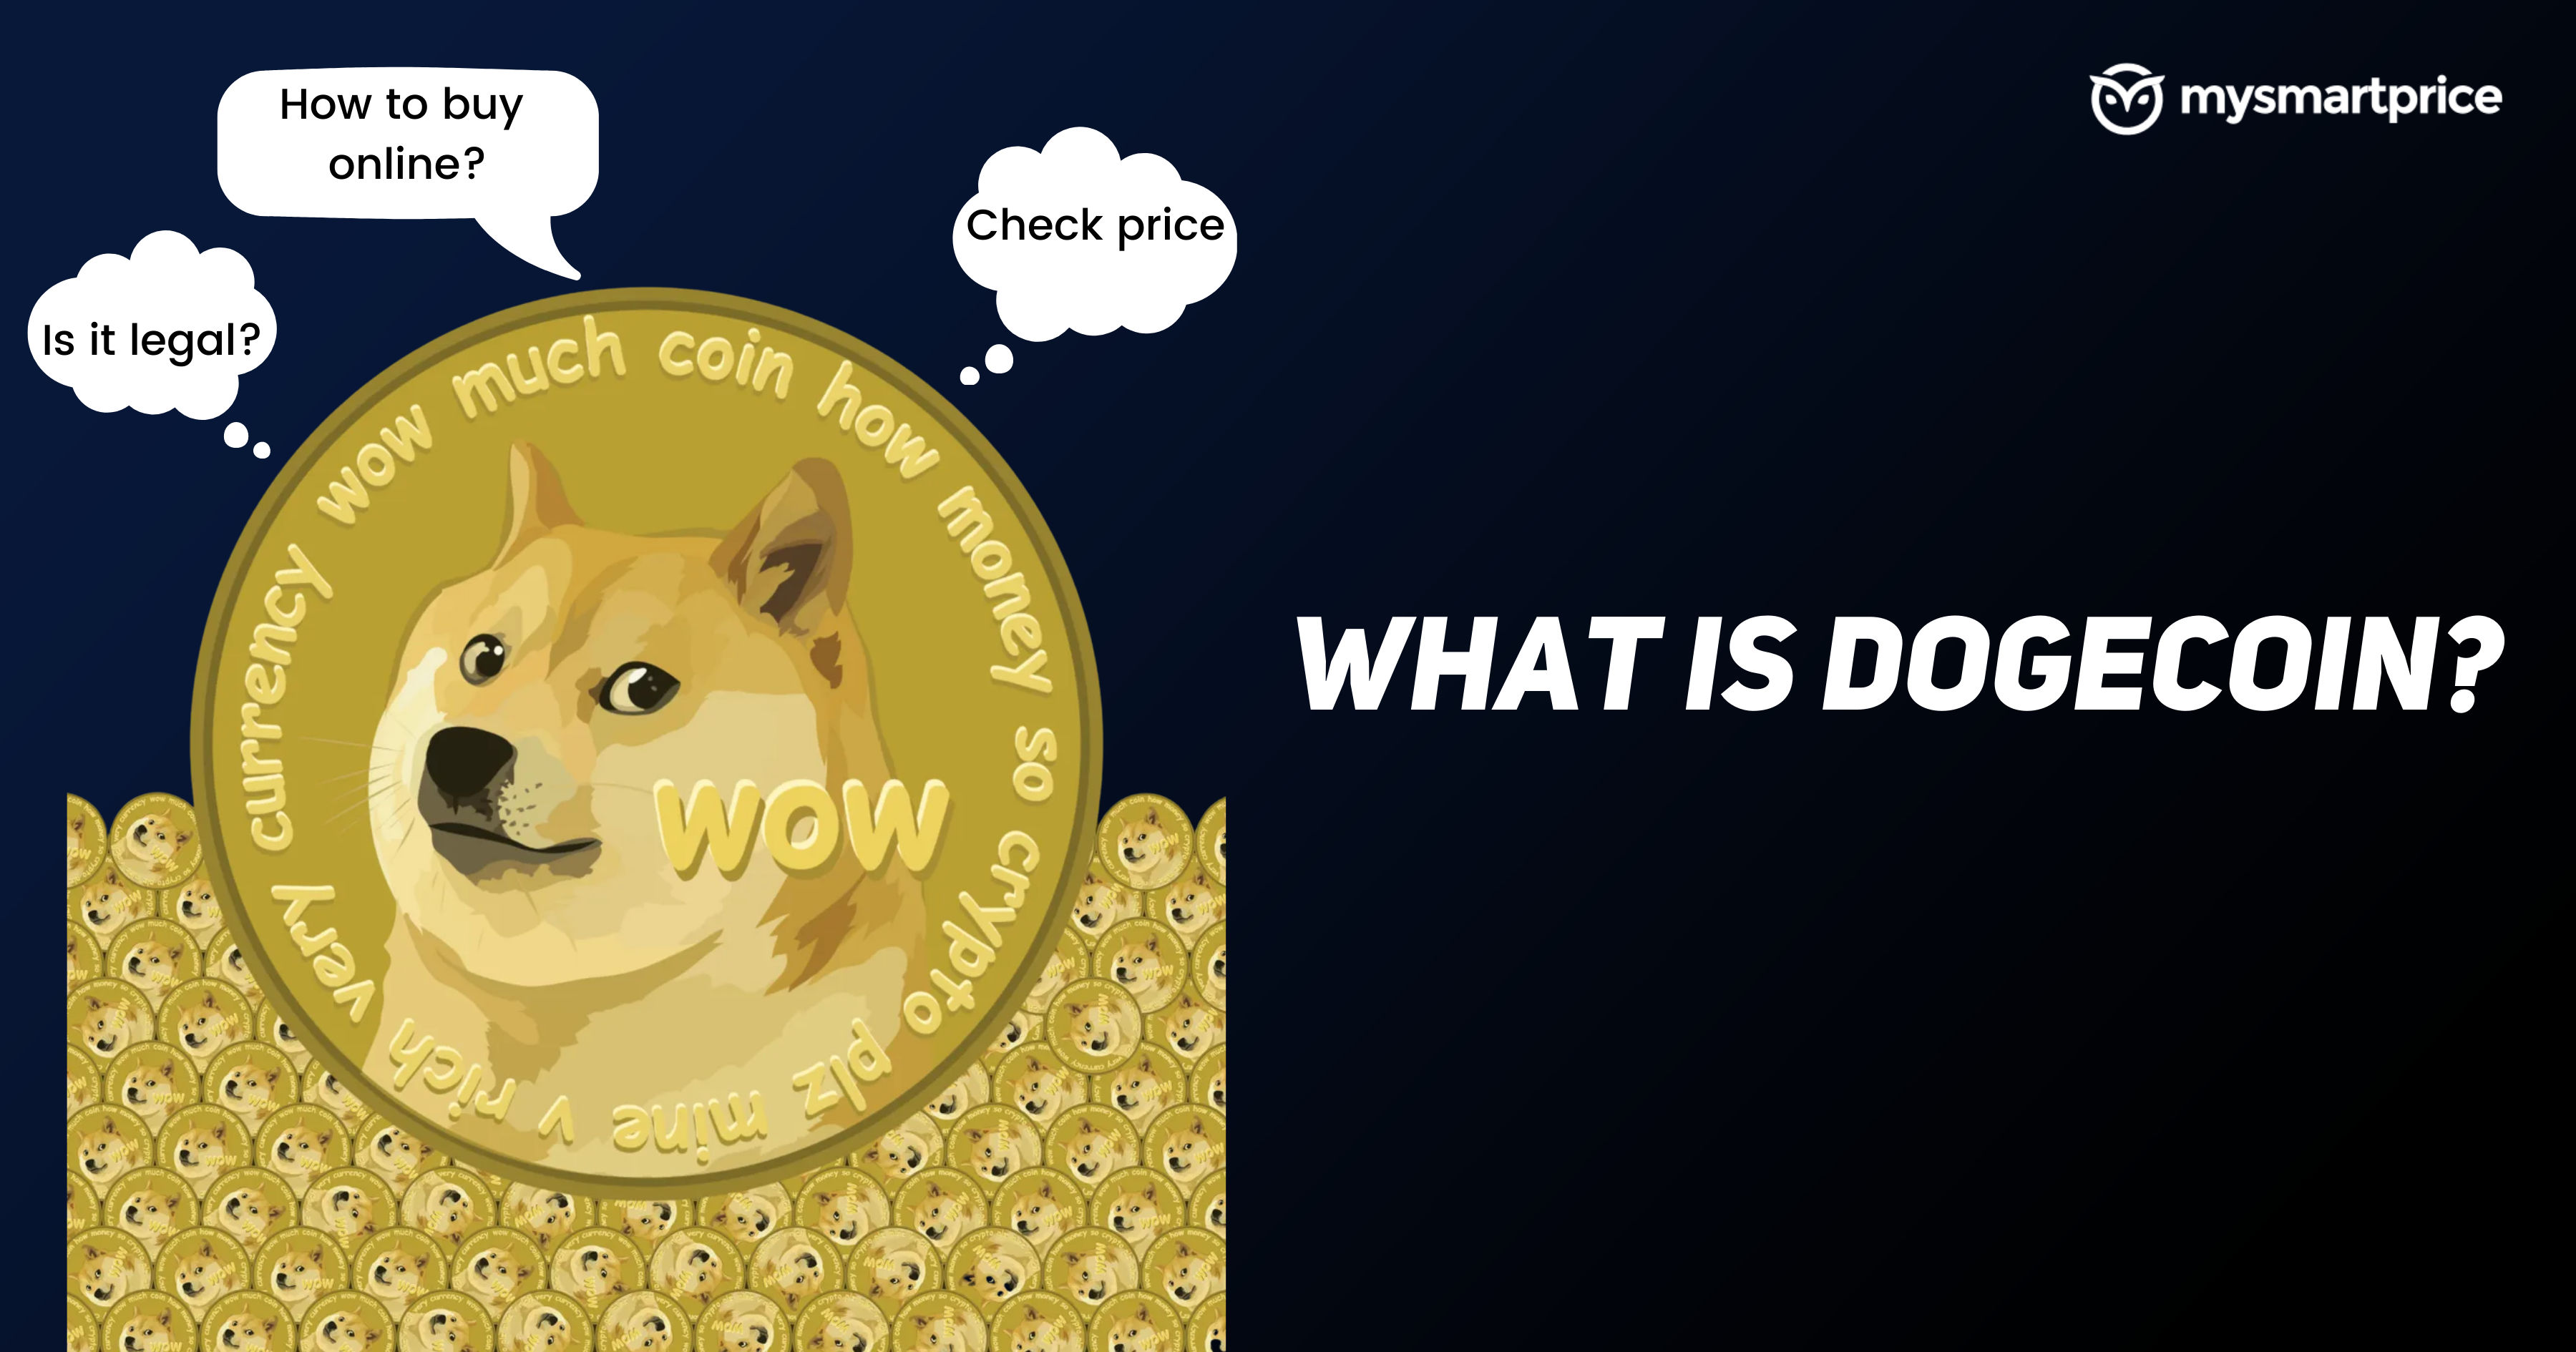 How much is dogecoin share worth right now